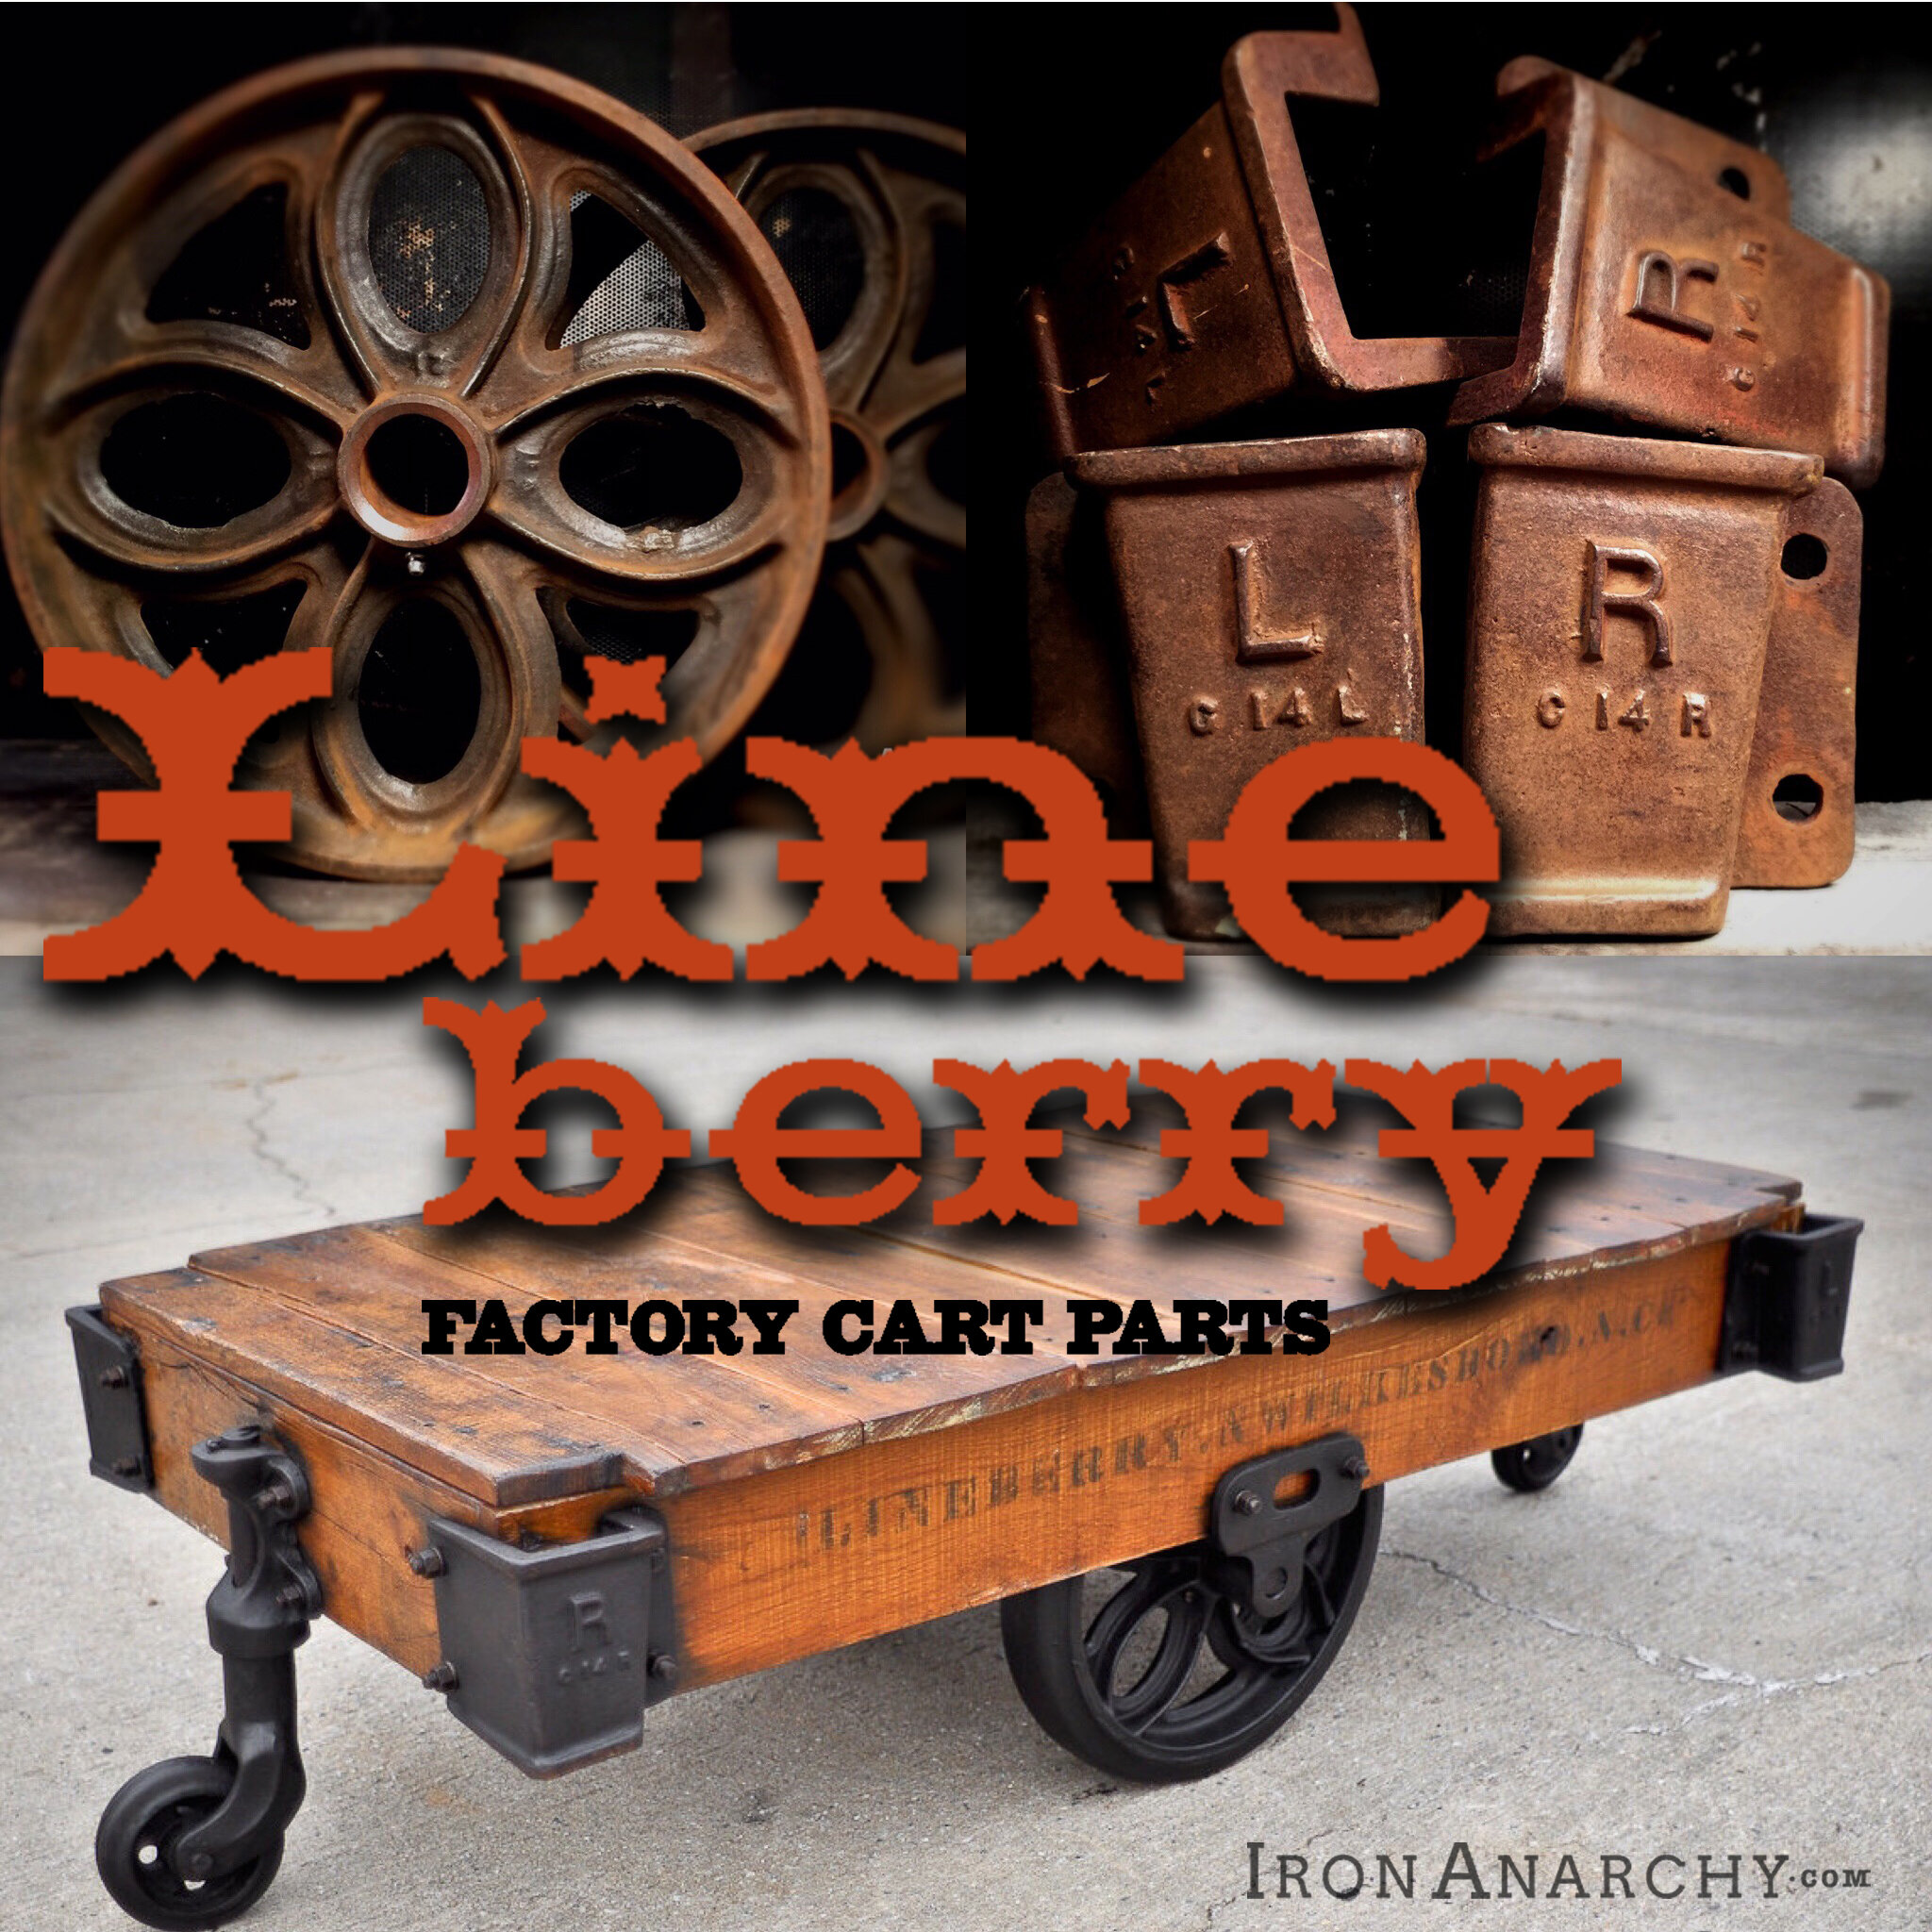 Copy of Antique Lineberry Factory Cart Hardware